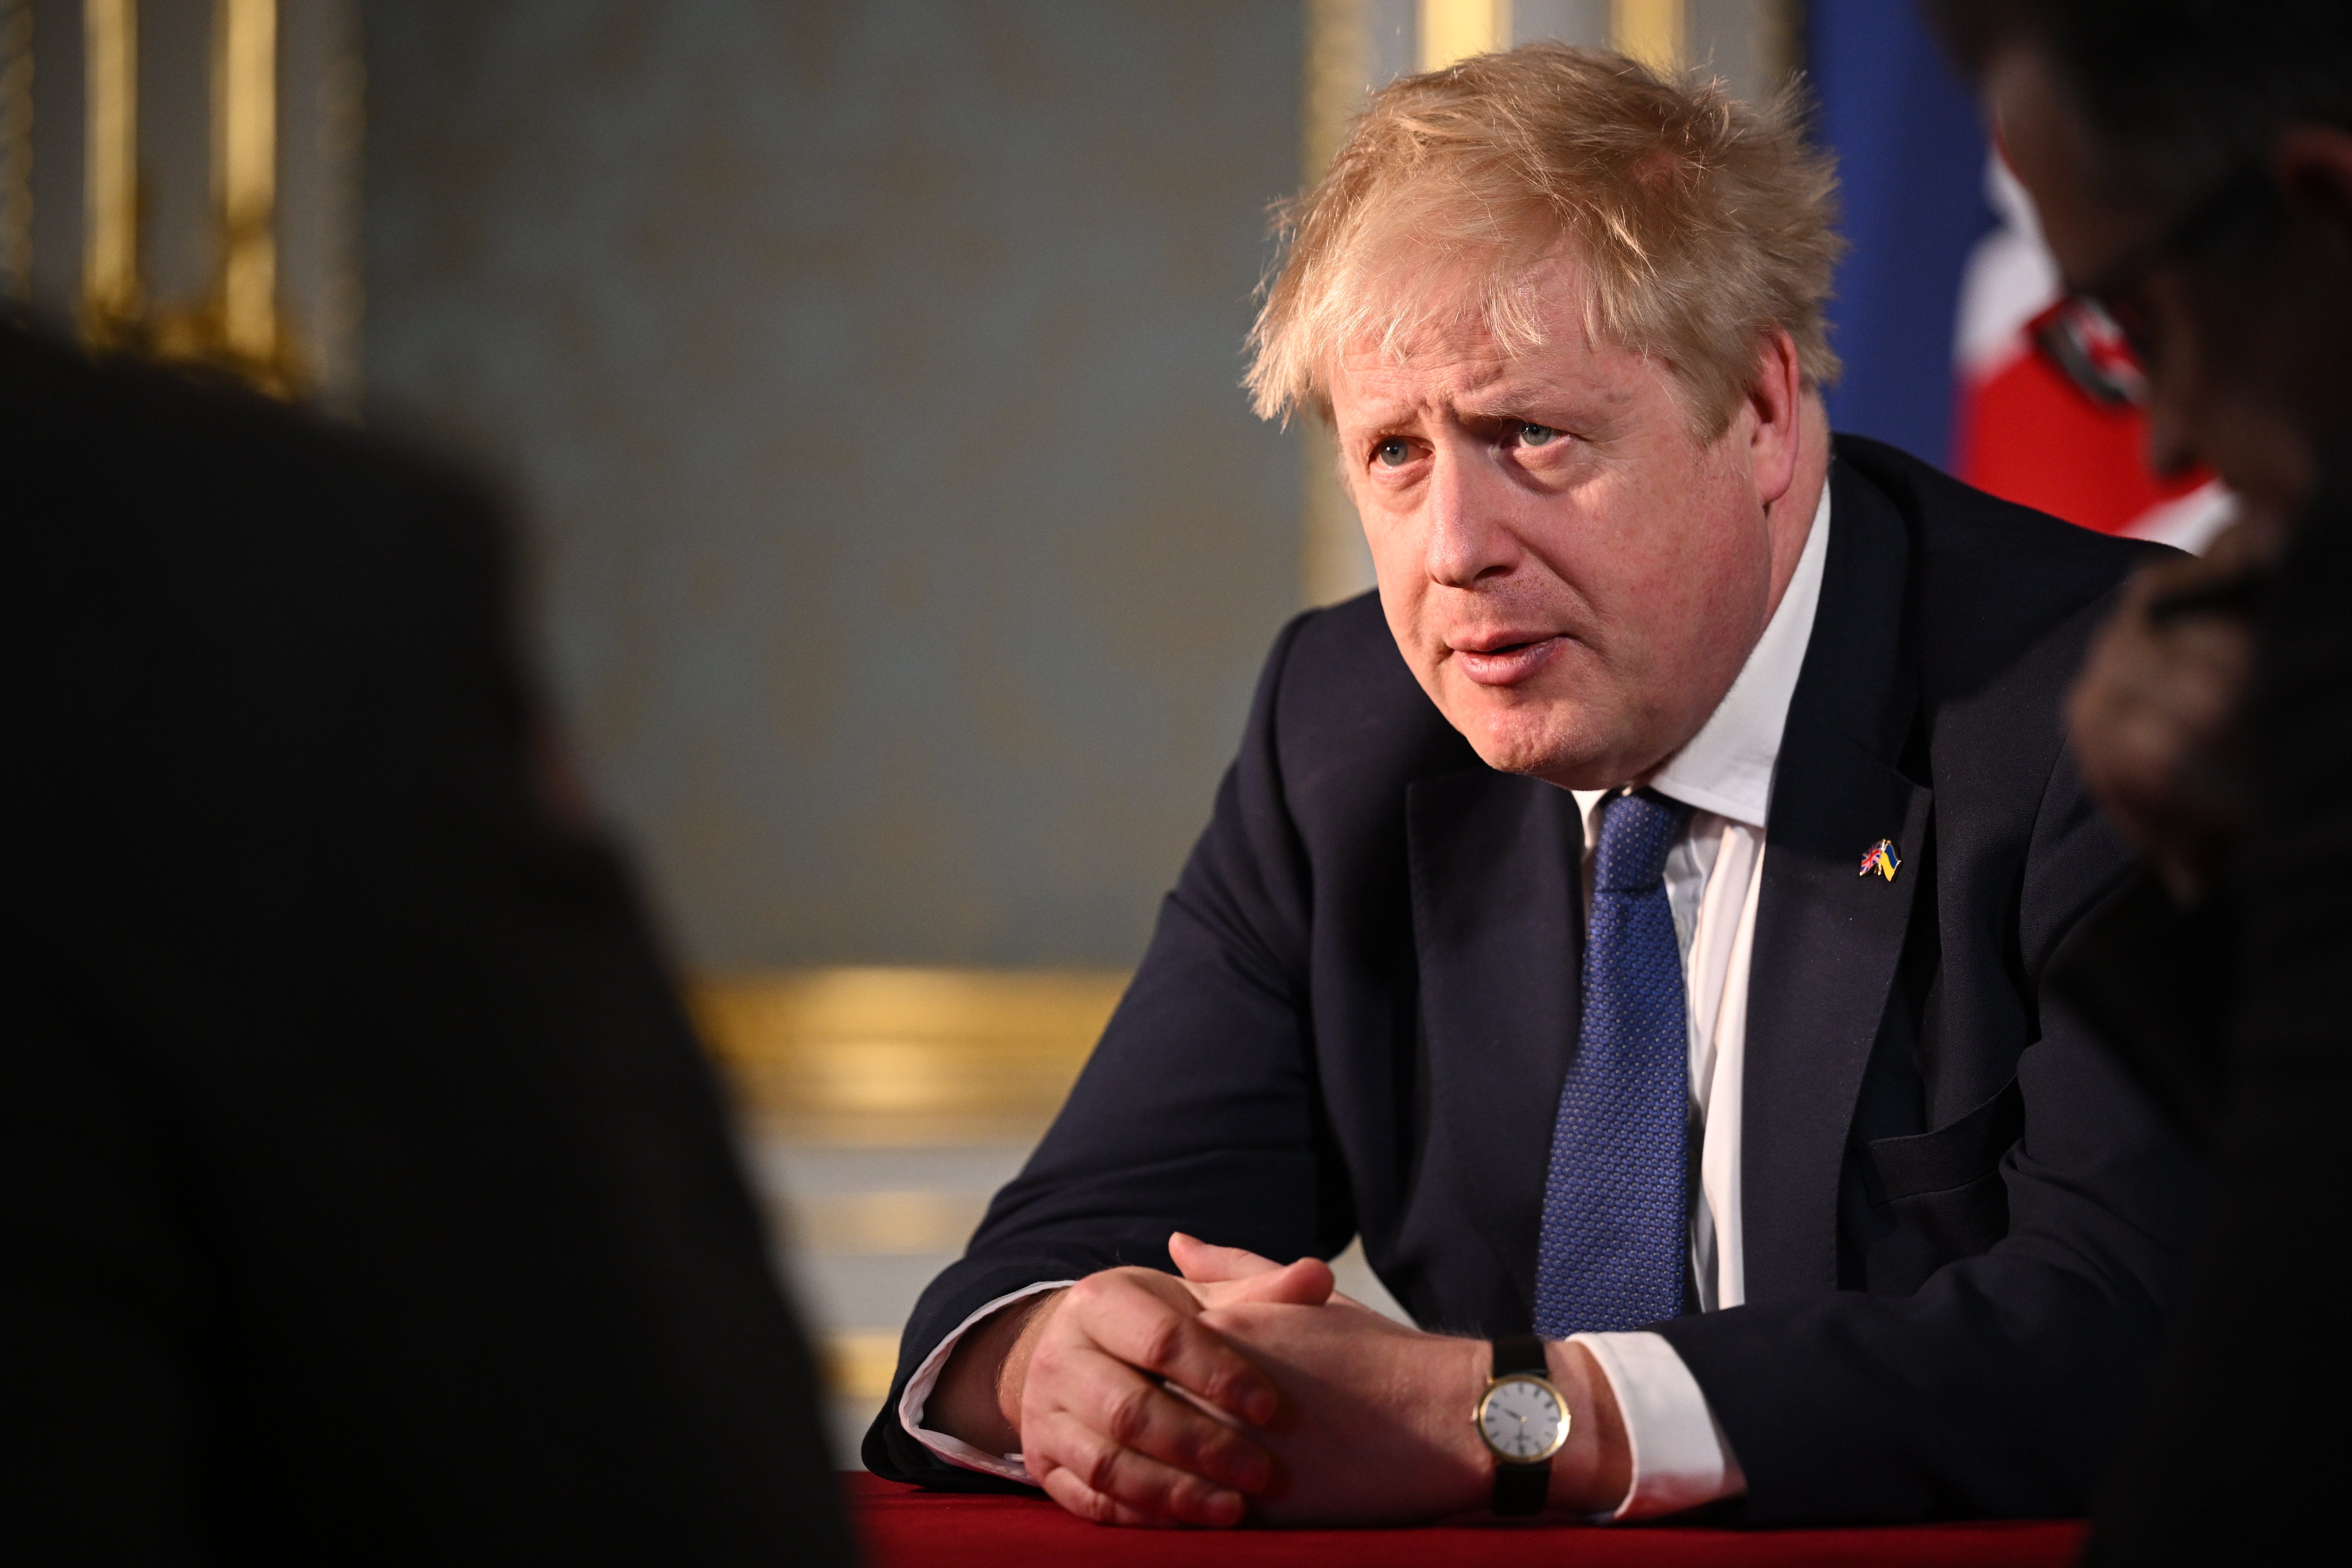 Johnson’s pitch to be leading Europe is ridiculed in EU capitals